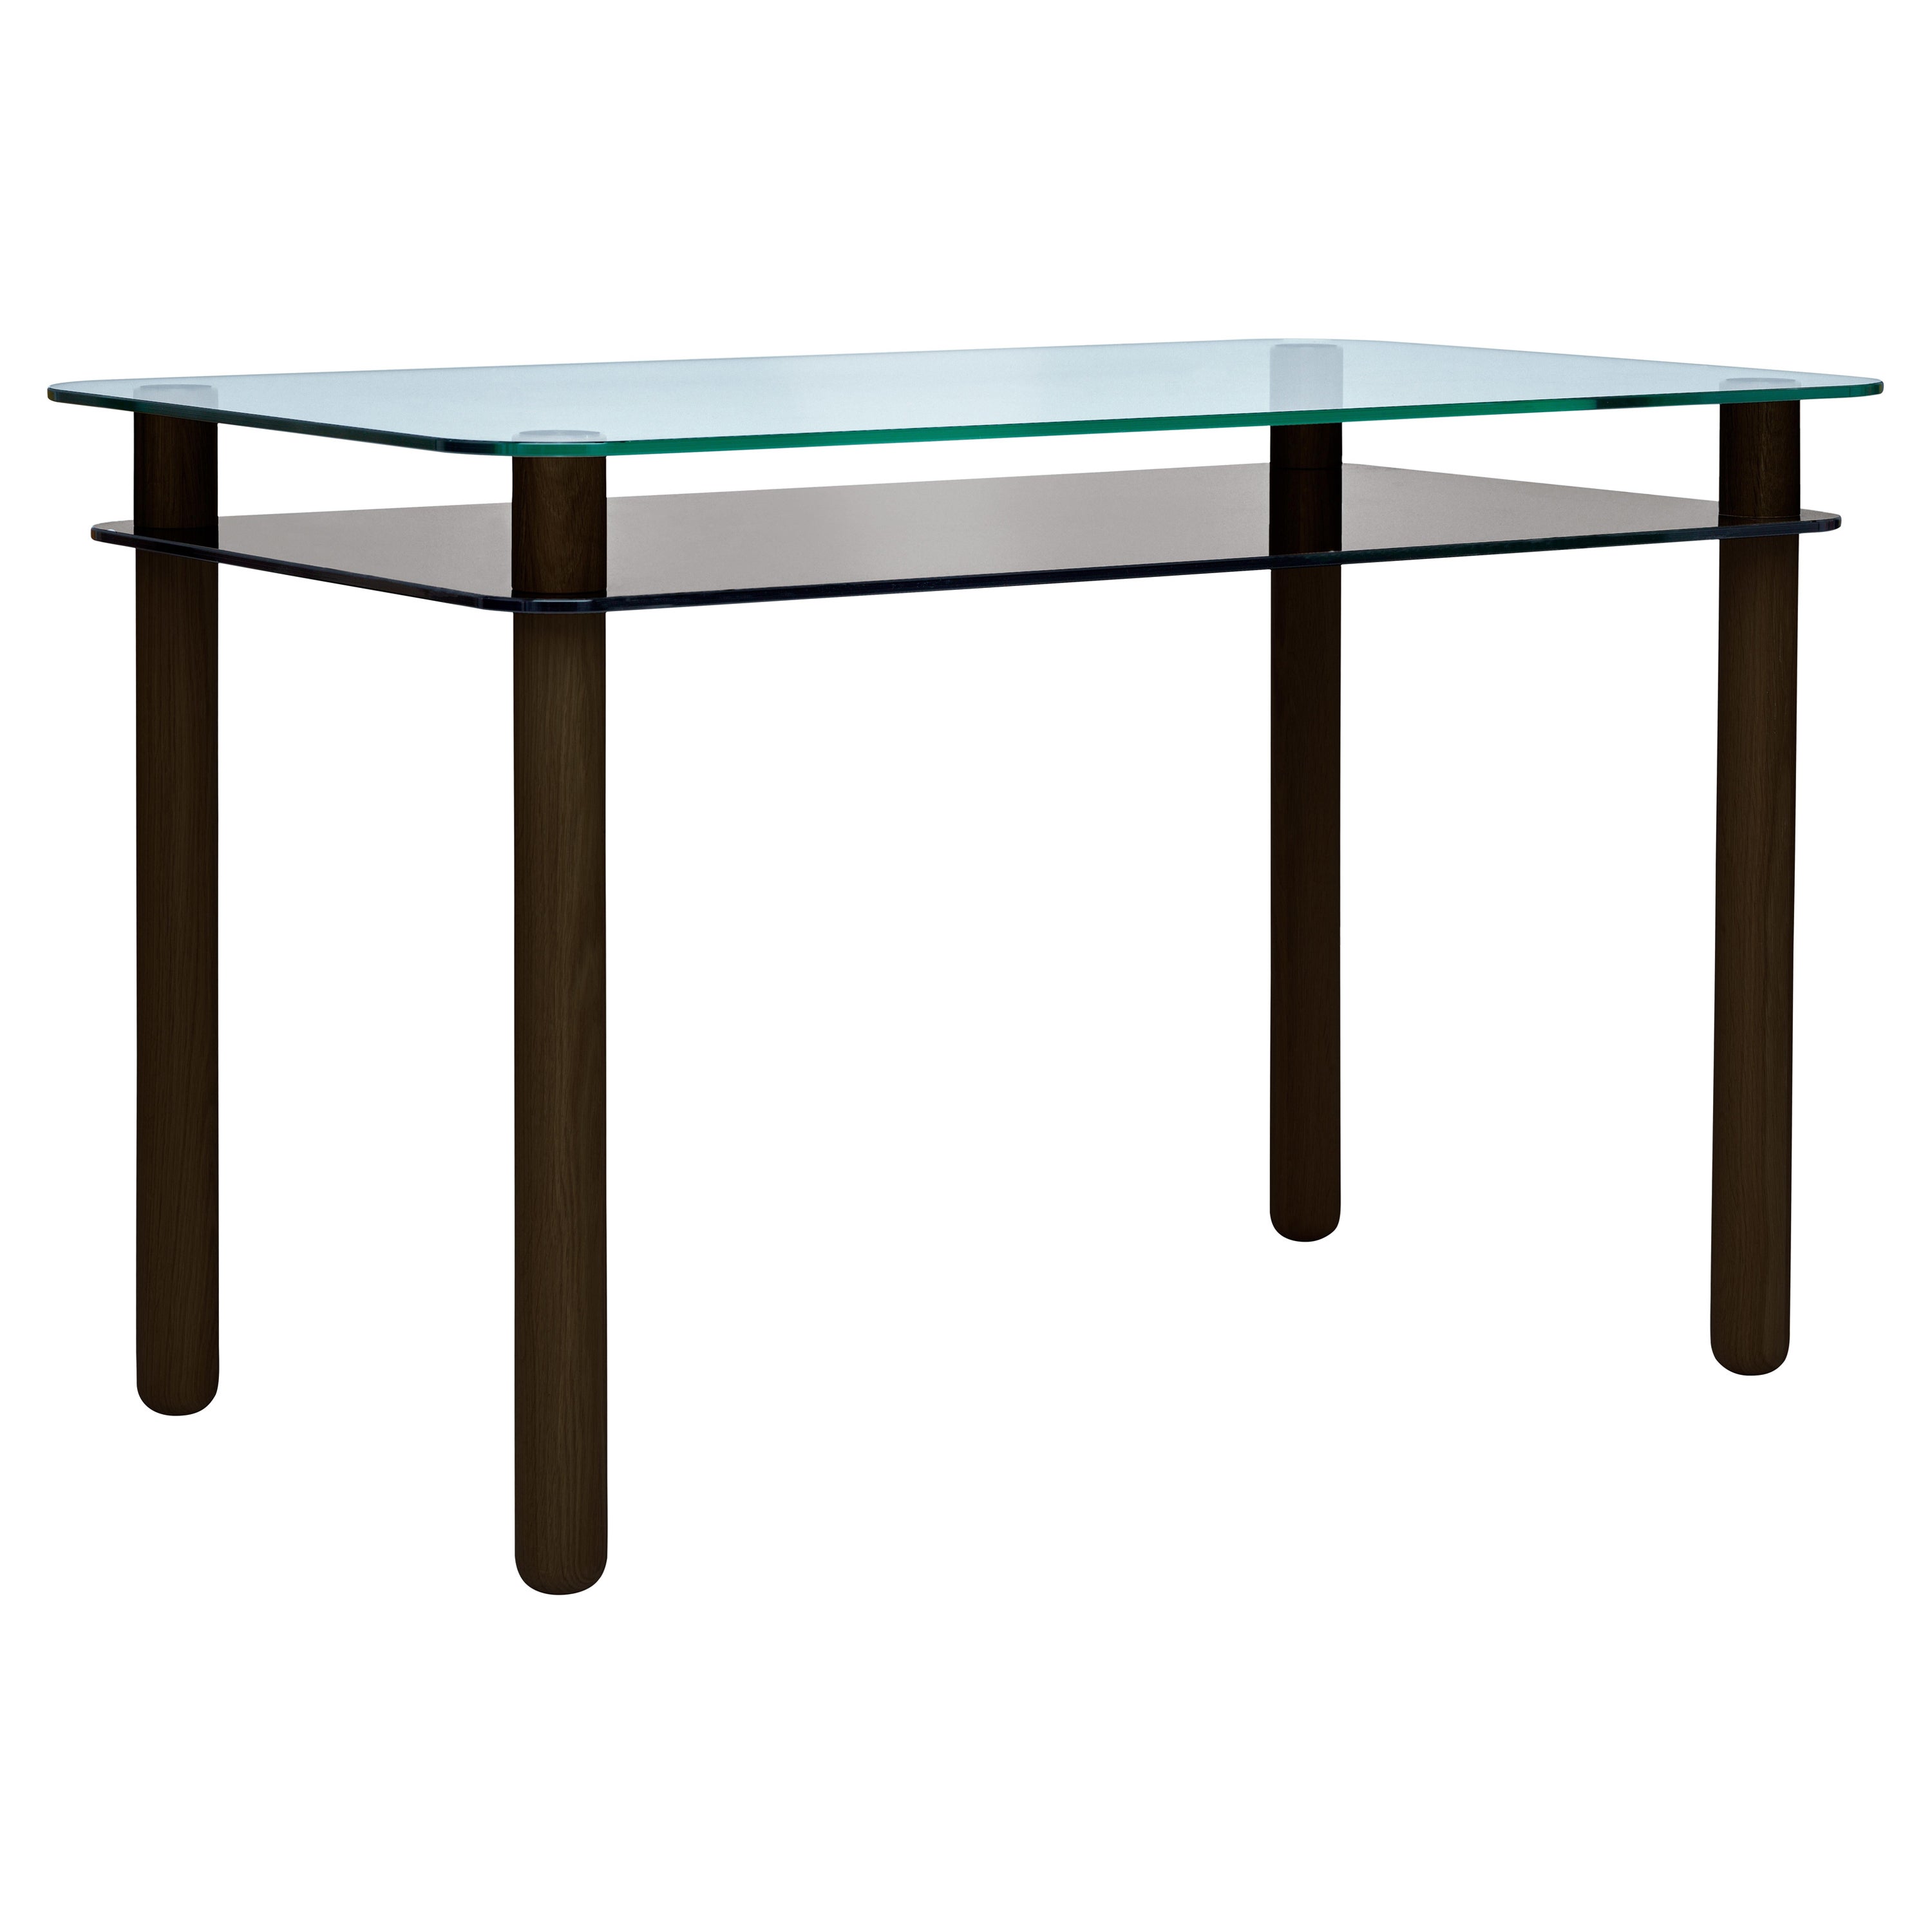 Big Sur Desk by Fogia, Clear & Anthracite Glass , Wenge Legs For Sale